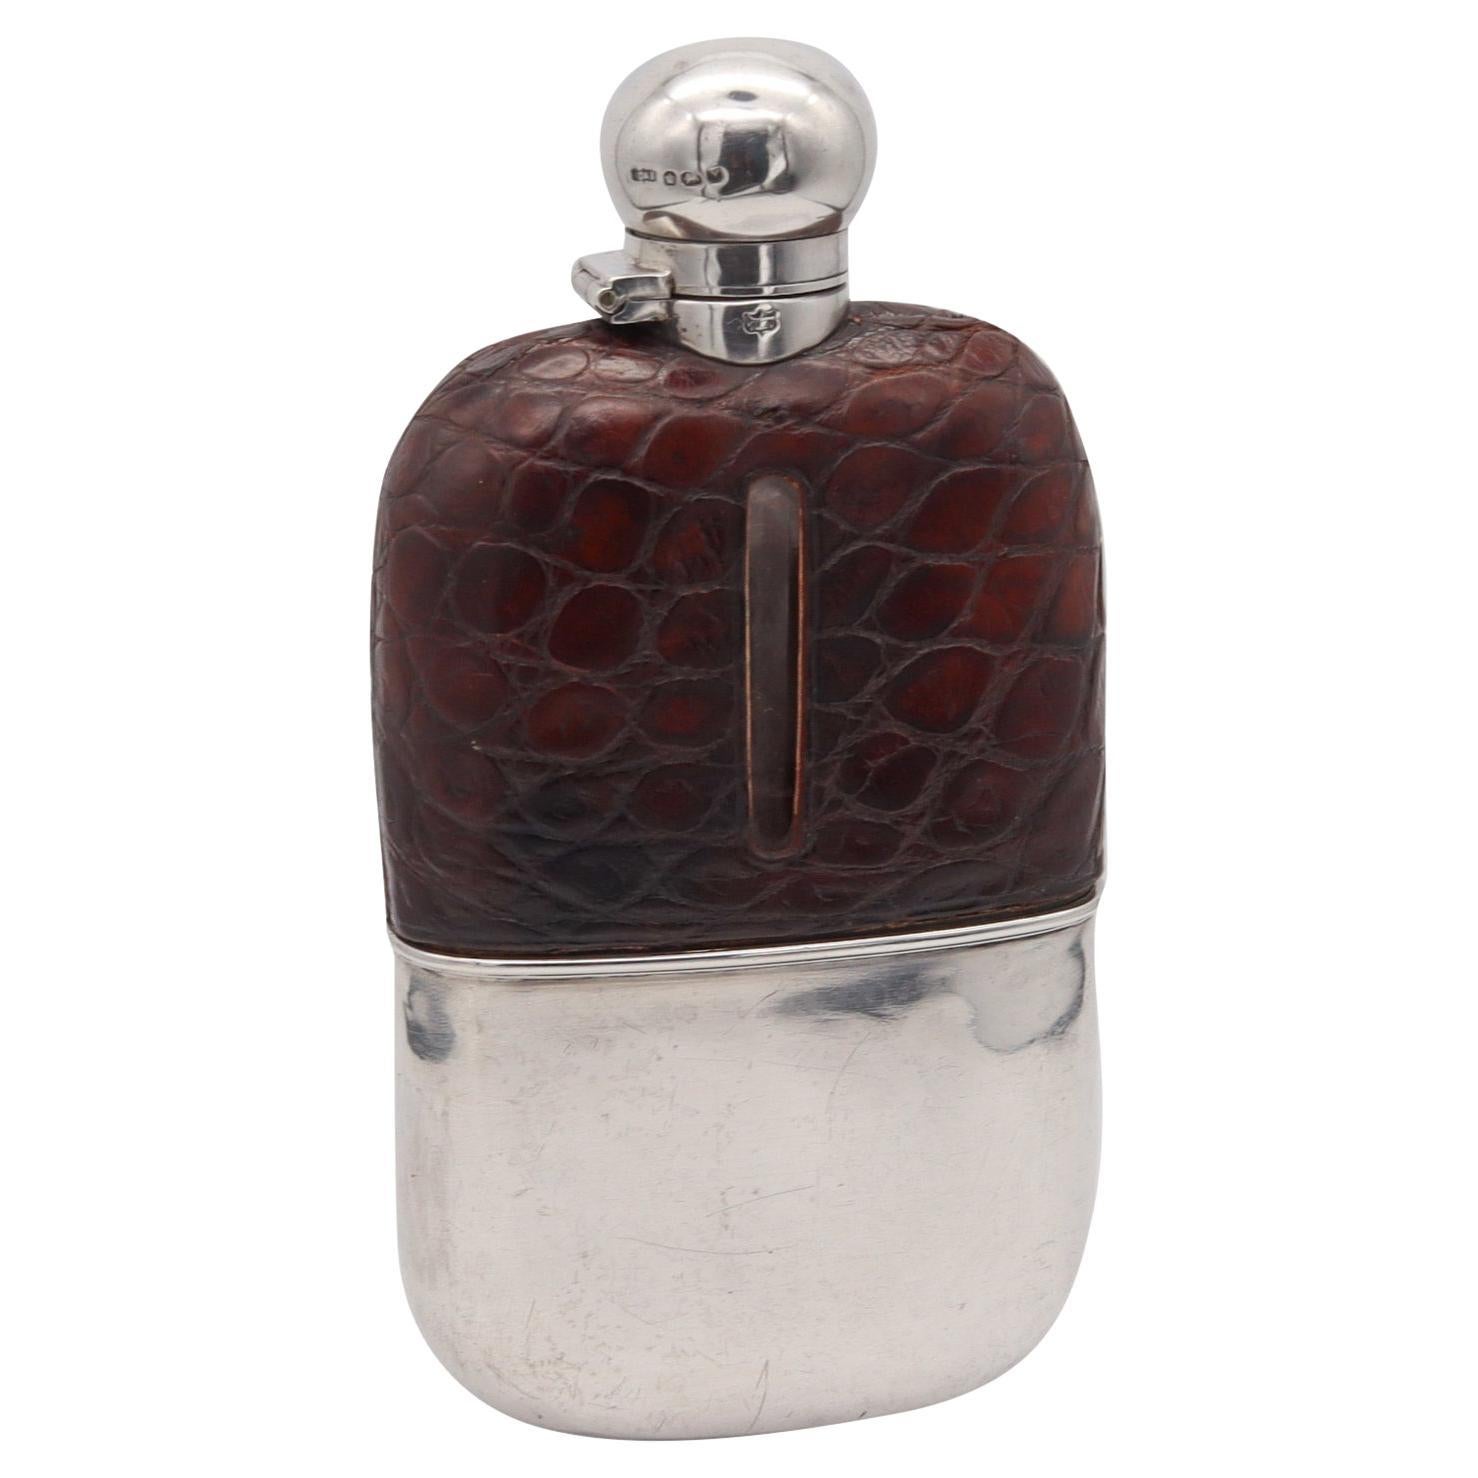 James Dixon & Sons 1891 Sheffield Large Liquor Flask in Sterling and Crocodile